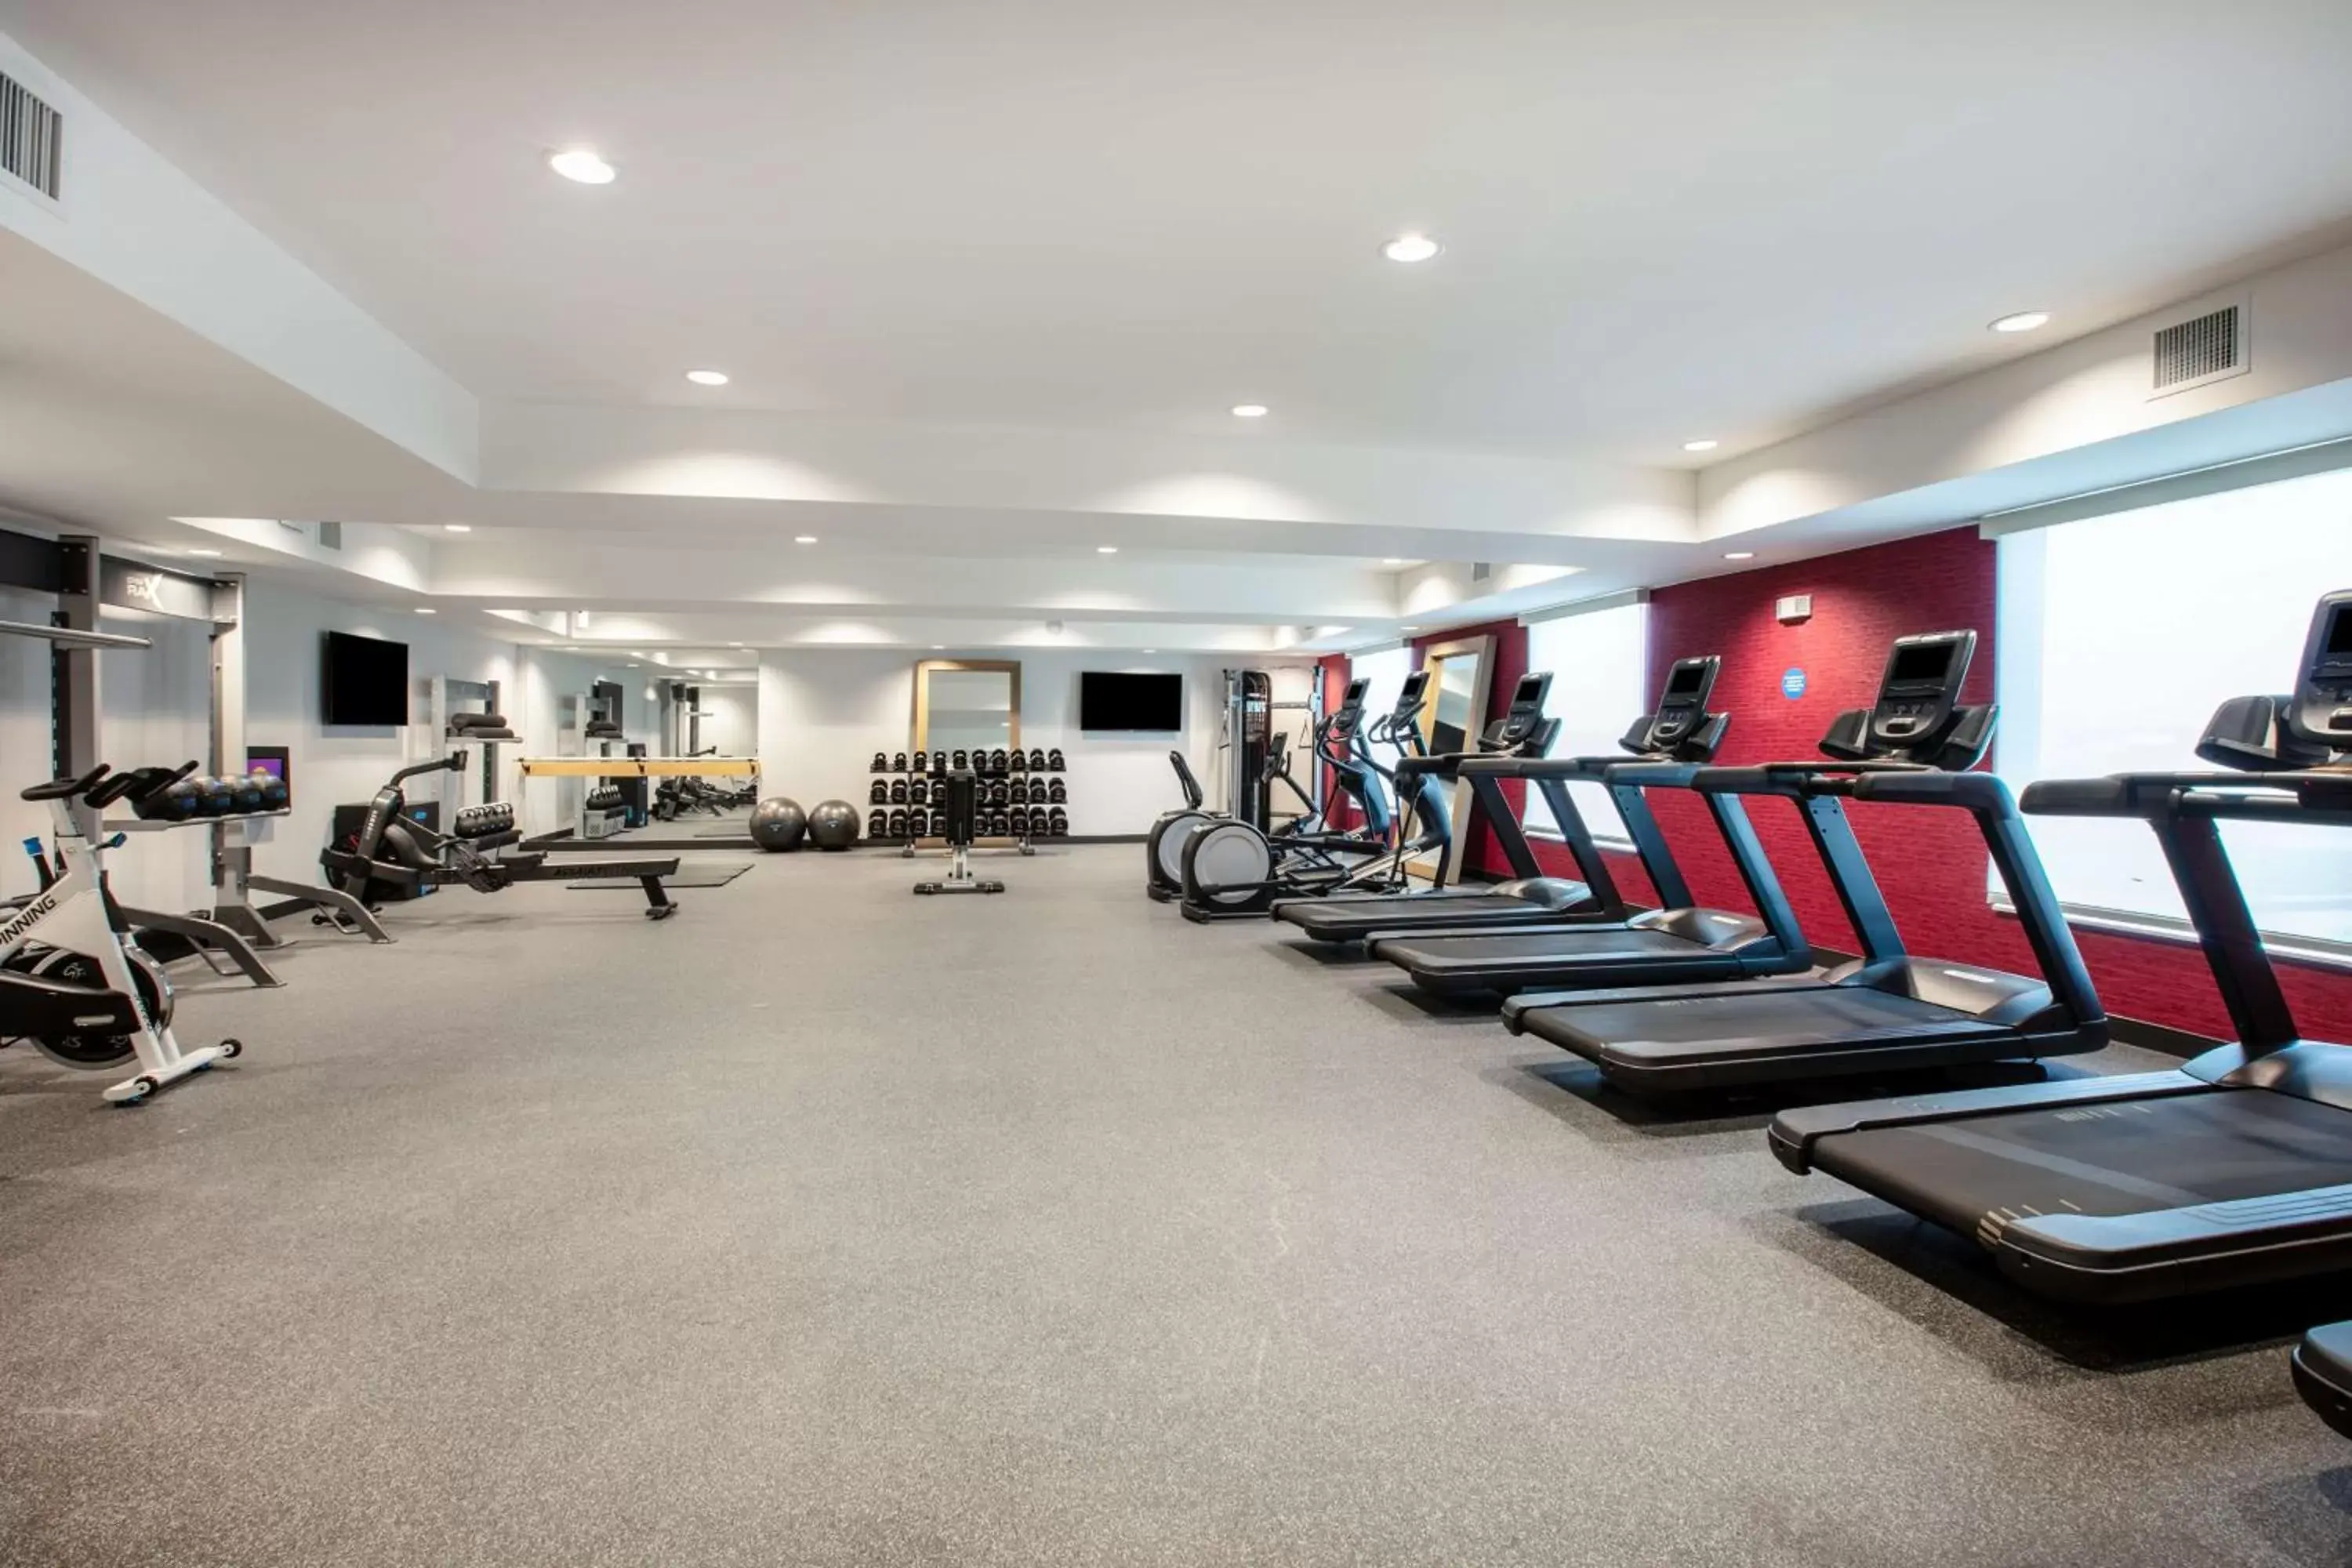 Fitness centre/facilities, Fitness Center/Facilities in Tru By Hilton Euless Dfw West, Tx